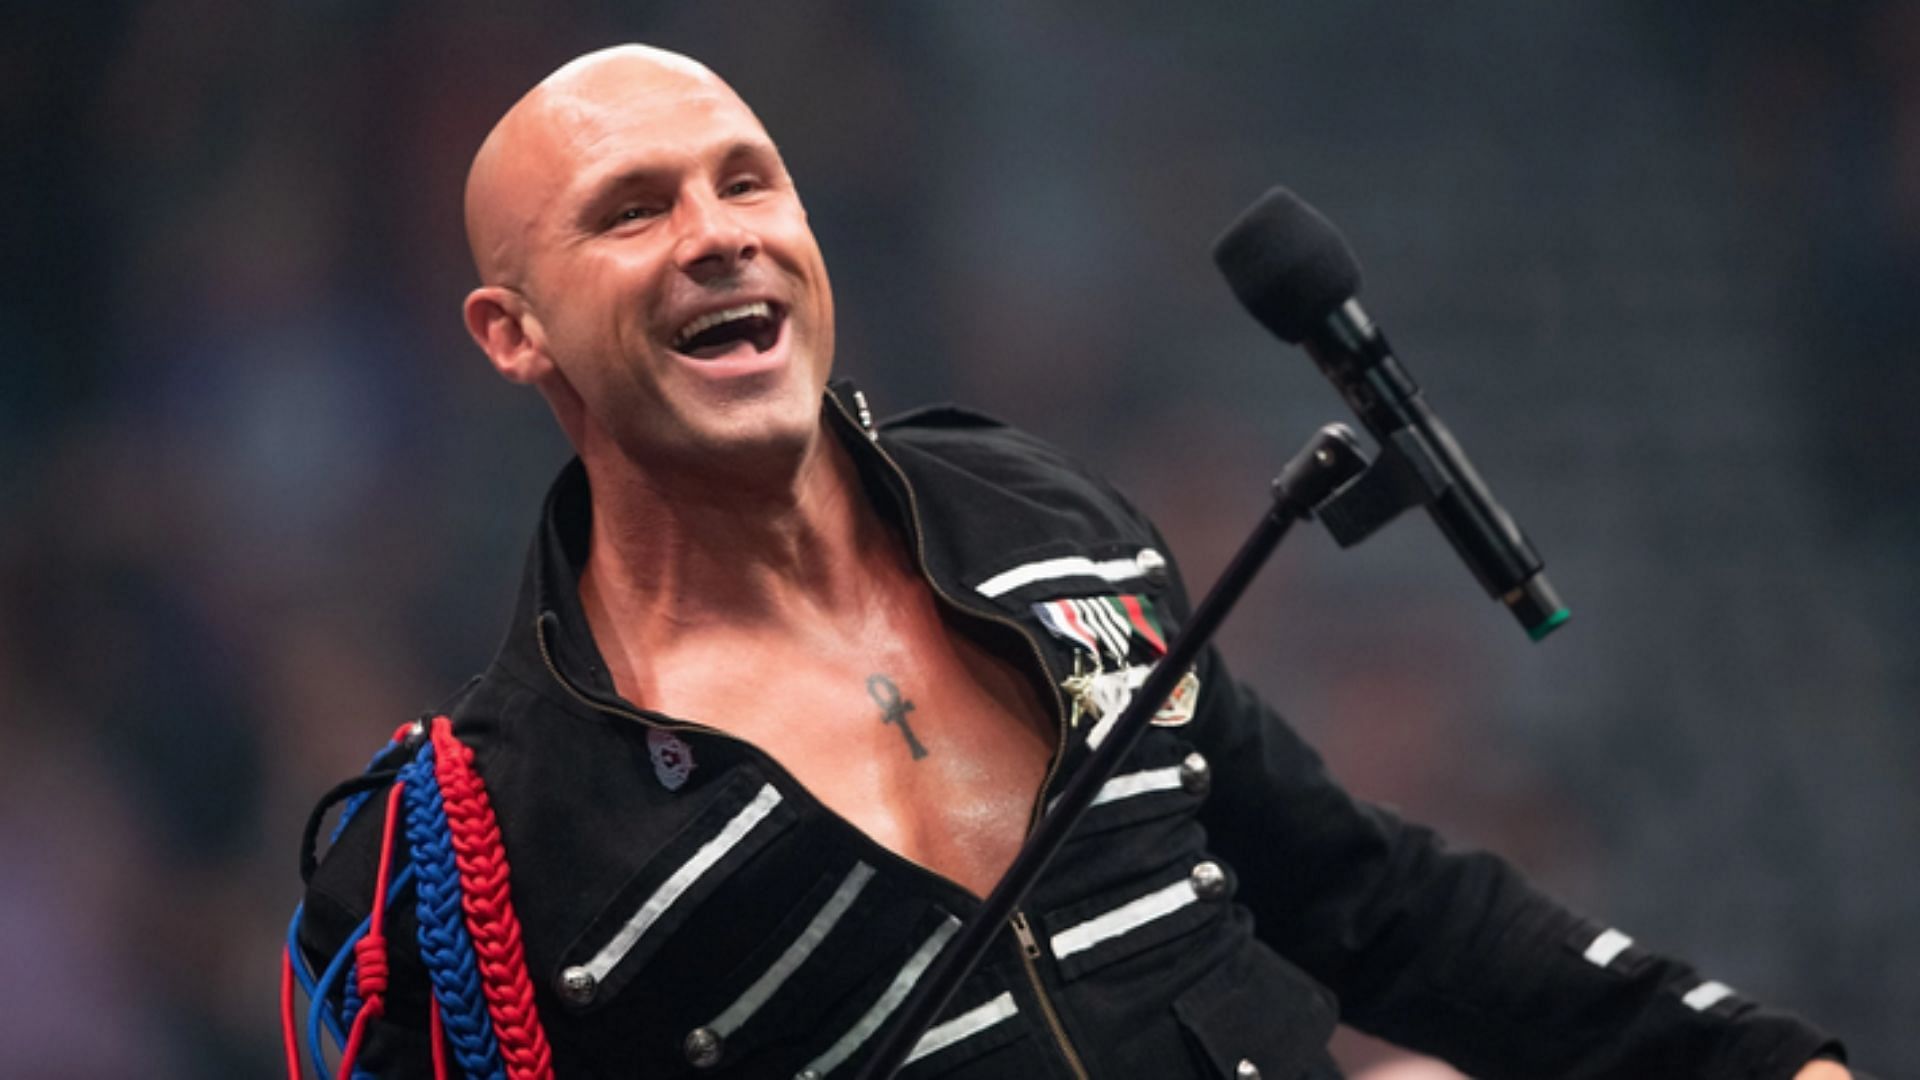 Christopher Daniels at an event in 2019